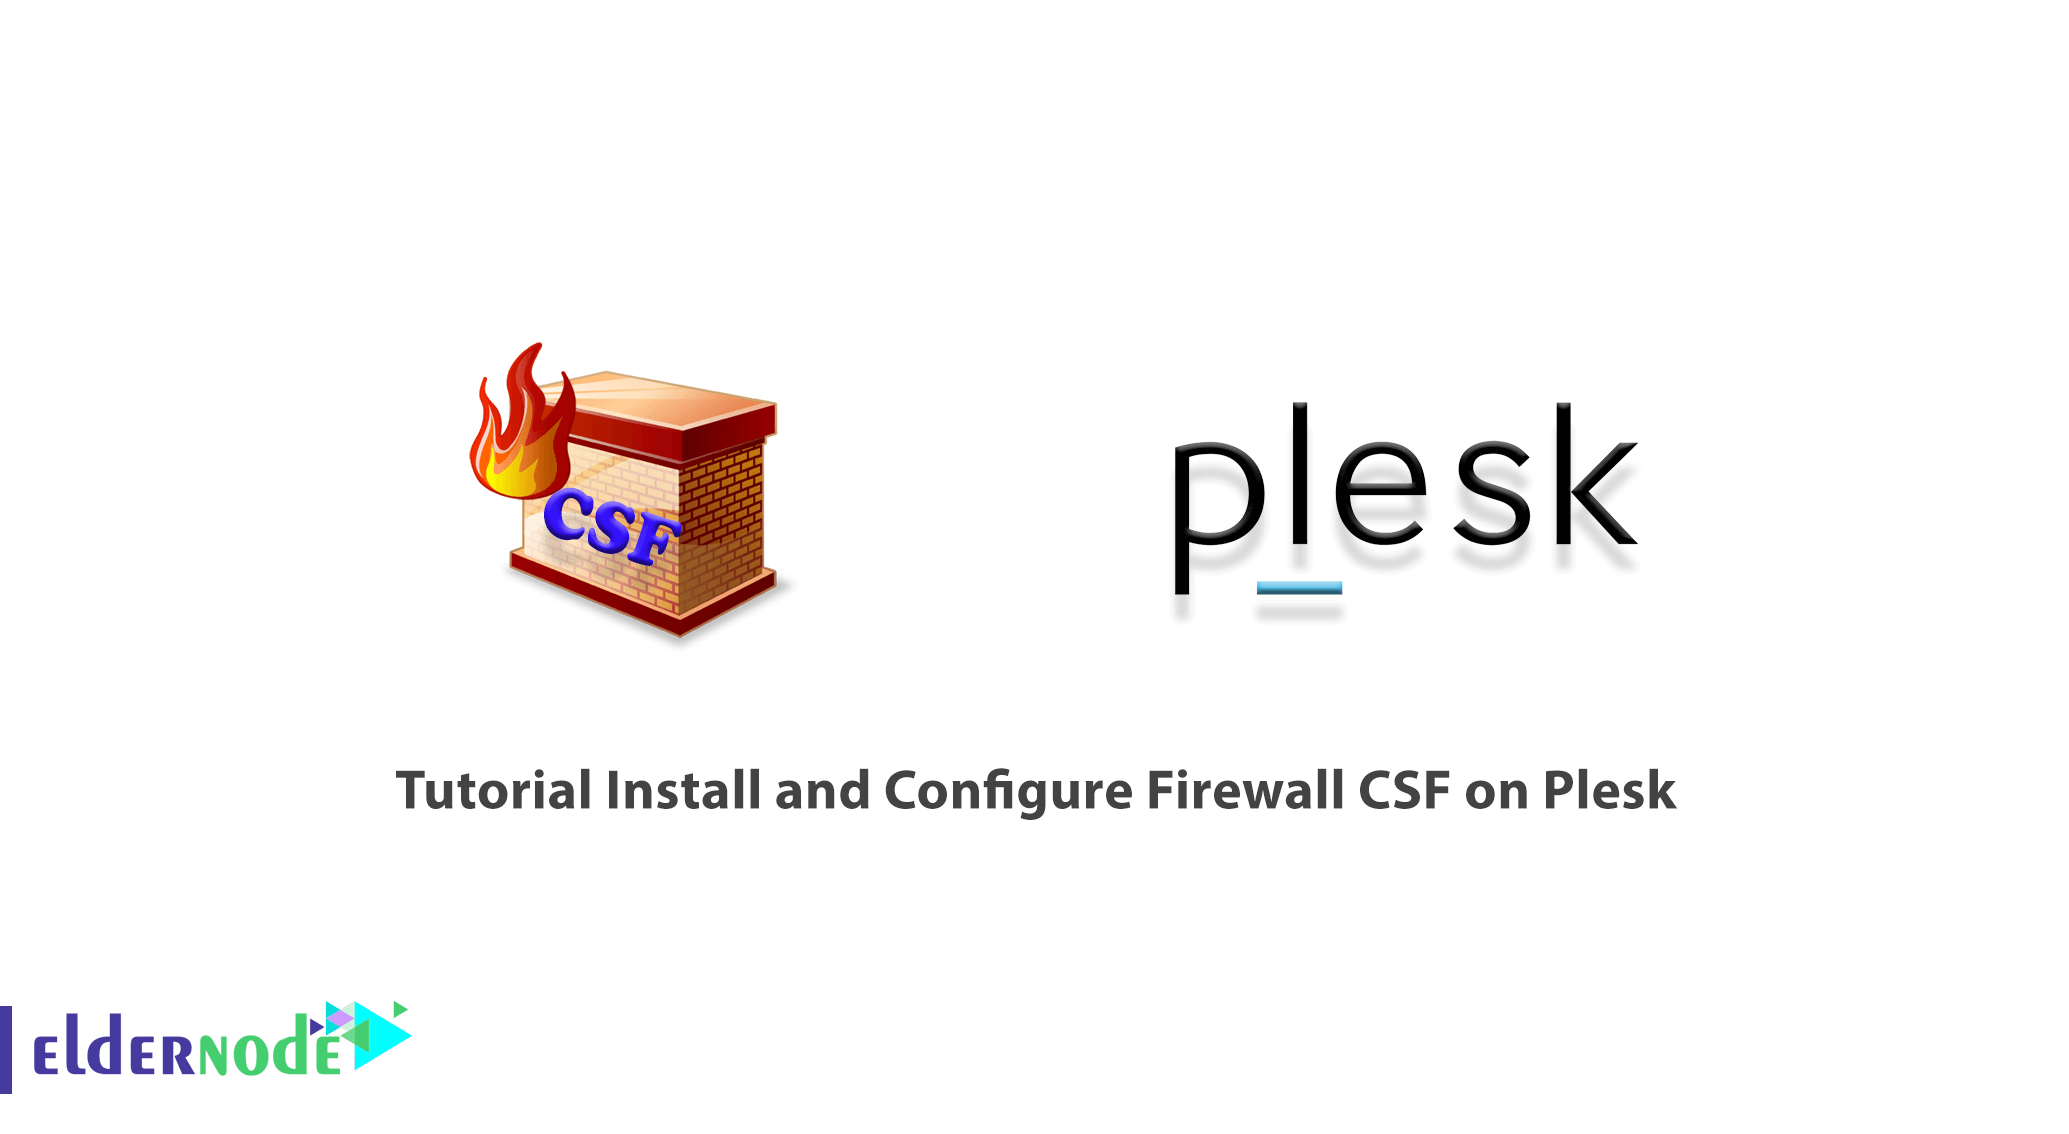 Tutorial Install and Configure Firewall CSF on Plesk